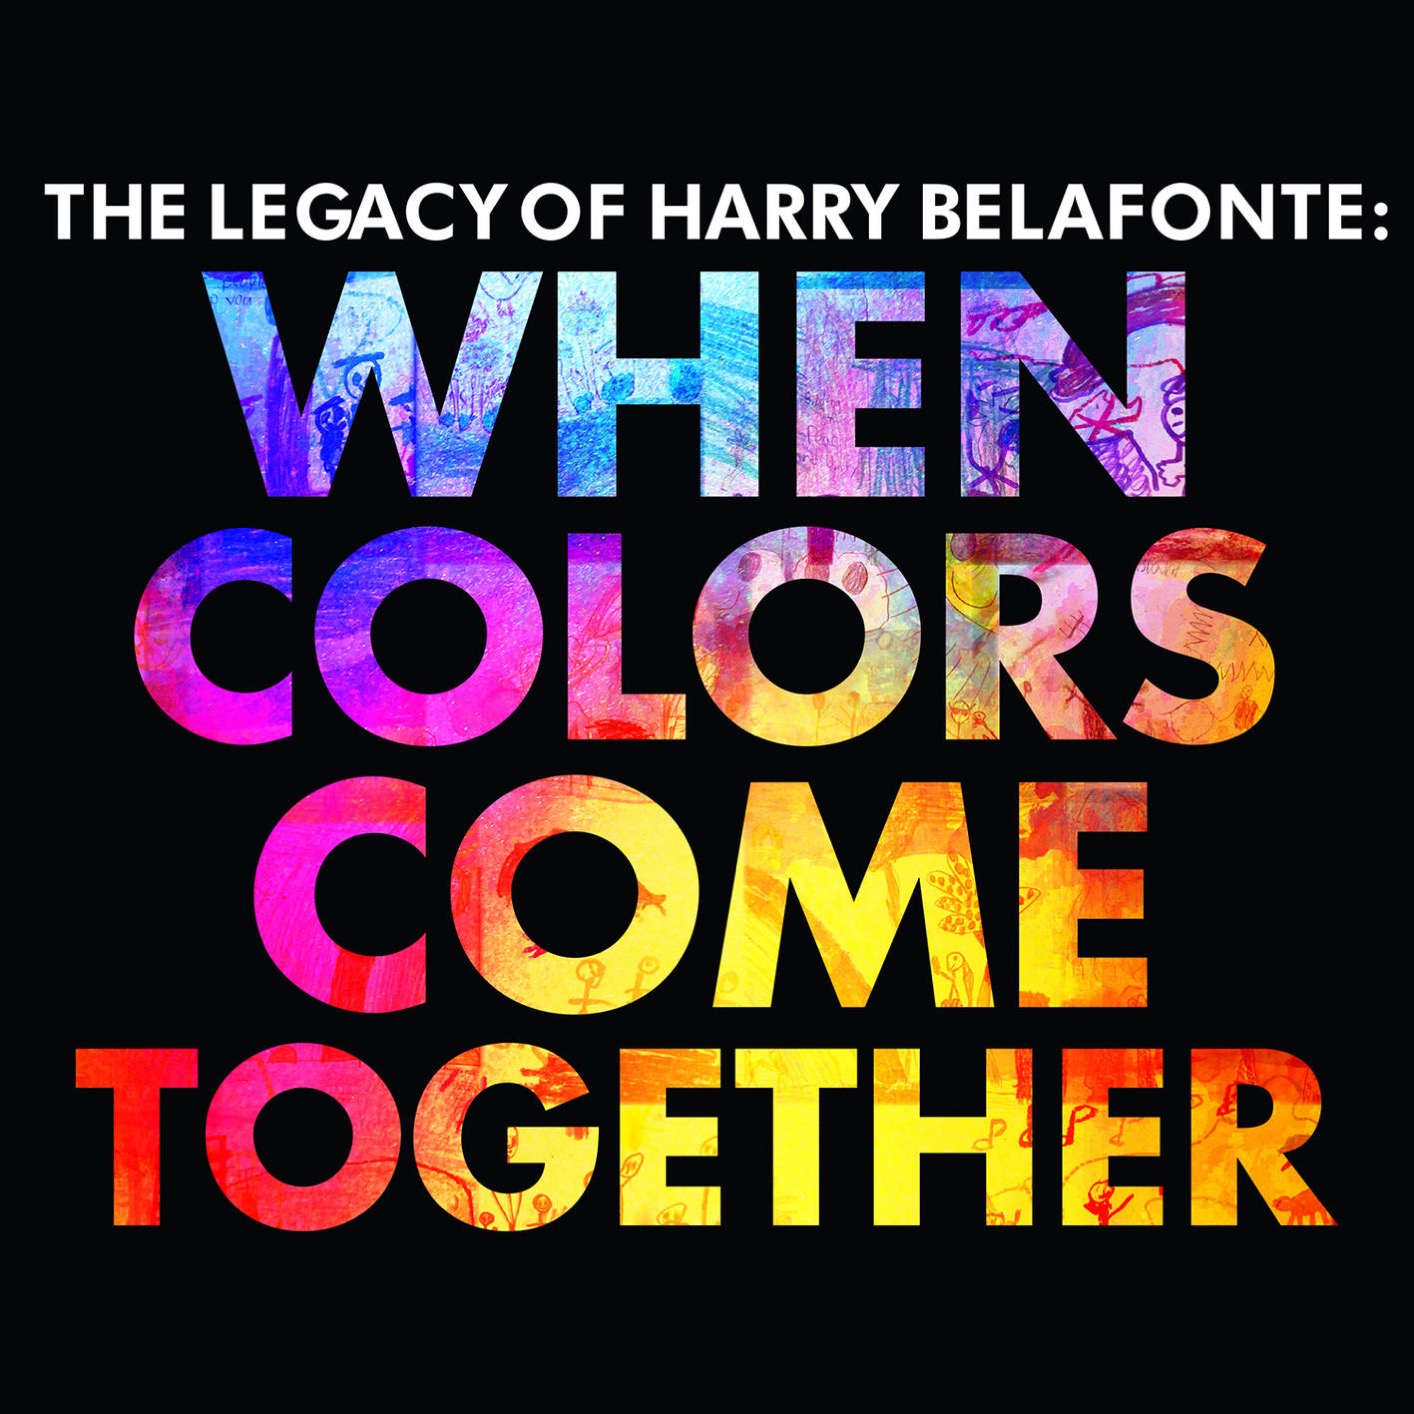 Harry Belafonte – The Legacy of Harry Belafonte: When Colors Come Together (2017) [FLAC 24bit/96kHz]